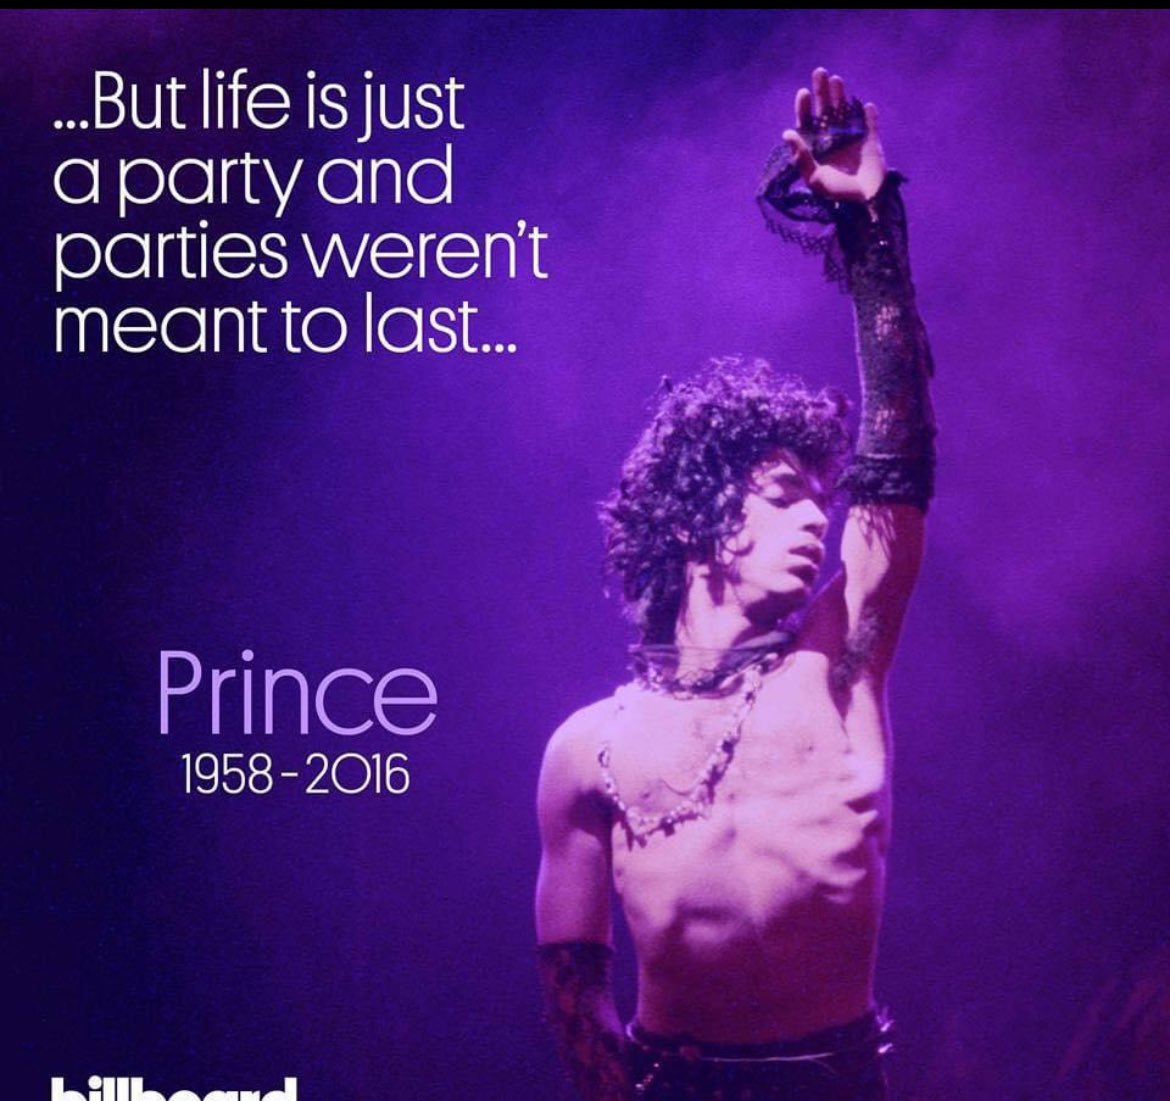 8 Years ago today already . One of the greatest musicians and performers ever left us. Music was never the same.